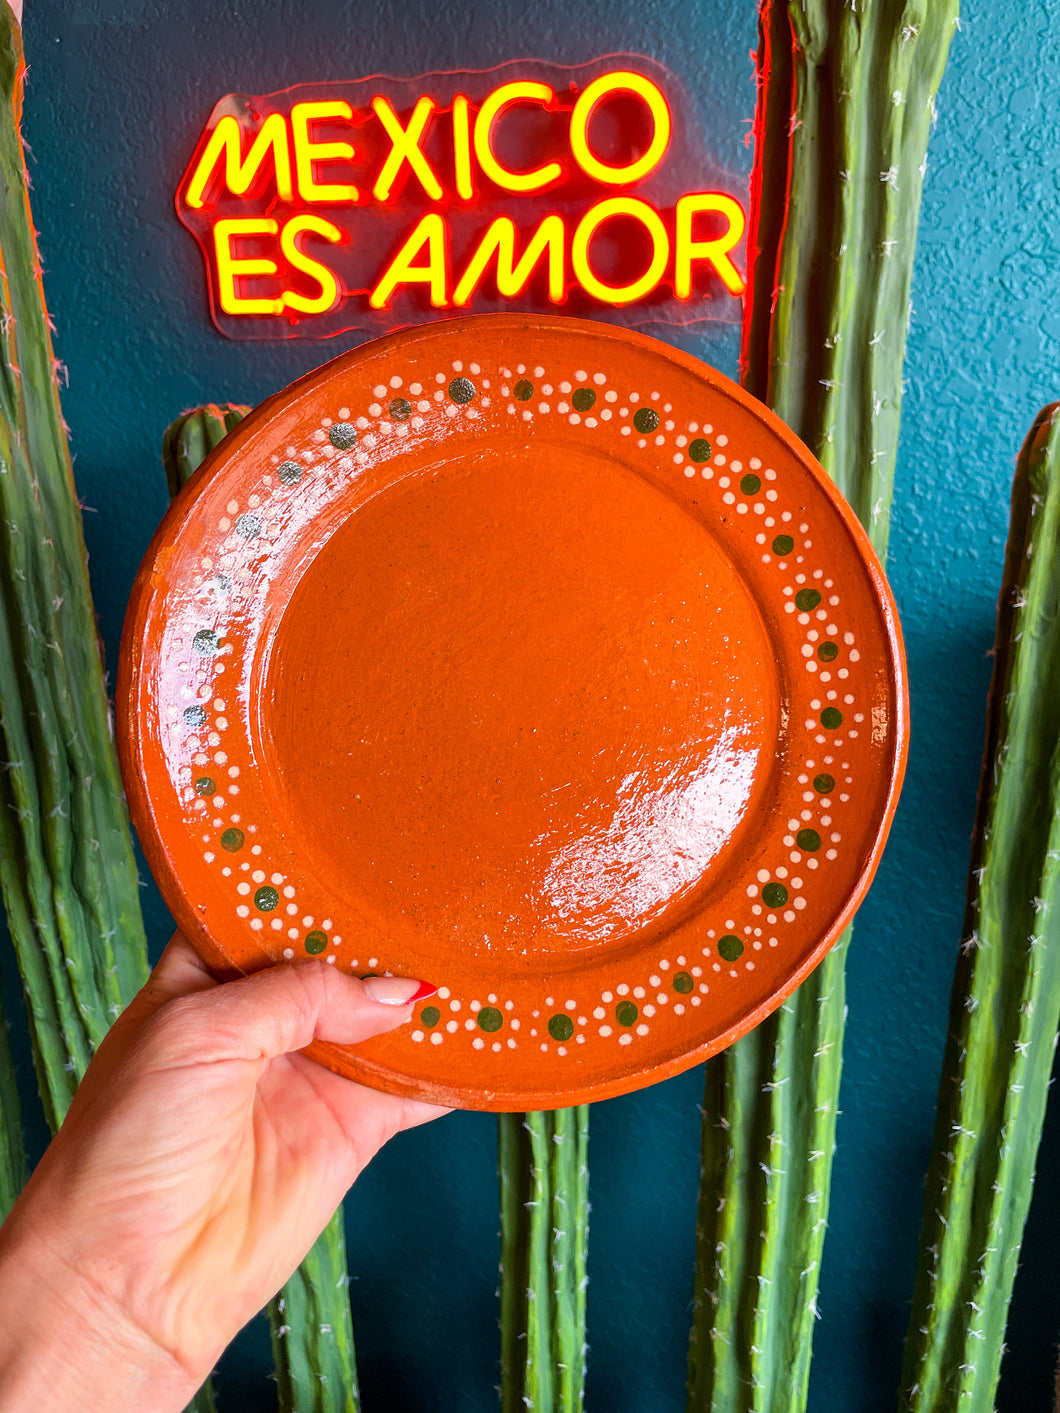 Mexican Clay Plates Set of 4 Round Mexican Clay Dinner Plates Mexican Plates Plato Redondo Trinche Lead Free Traditional Mexican Plates